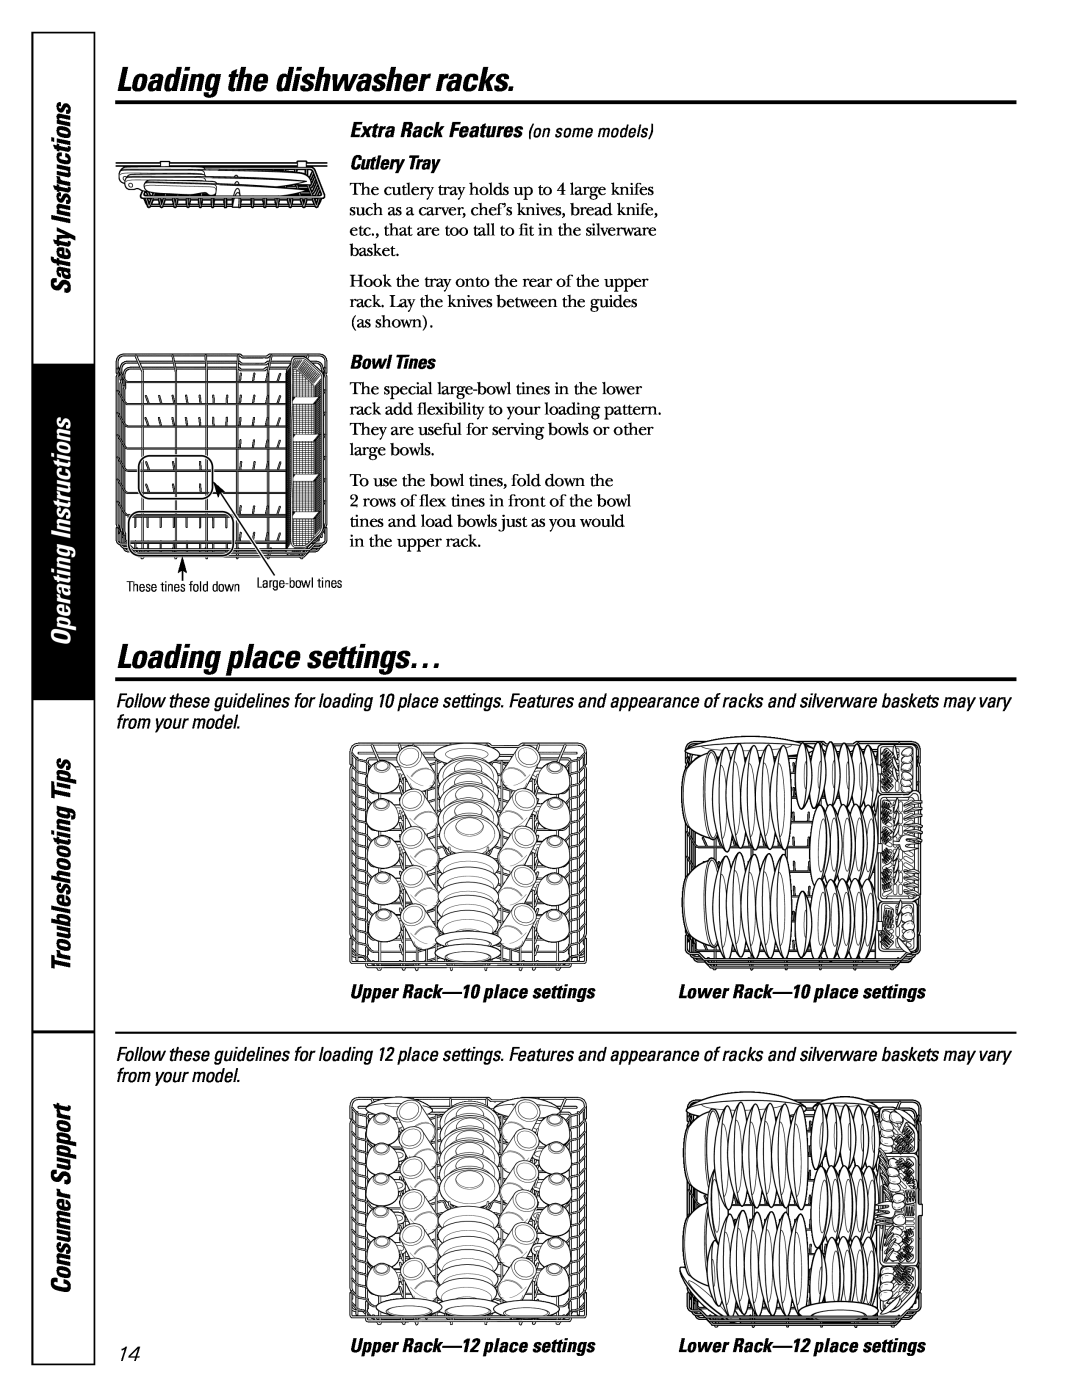 GE PDW9900 Loading place settings…, Extra Rack Features on some models, Cutlery Tray, Bowl Tines, Safety Instructions 